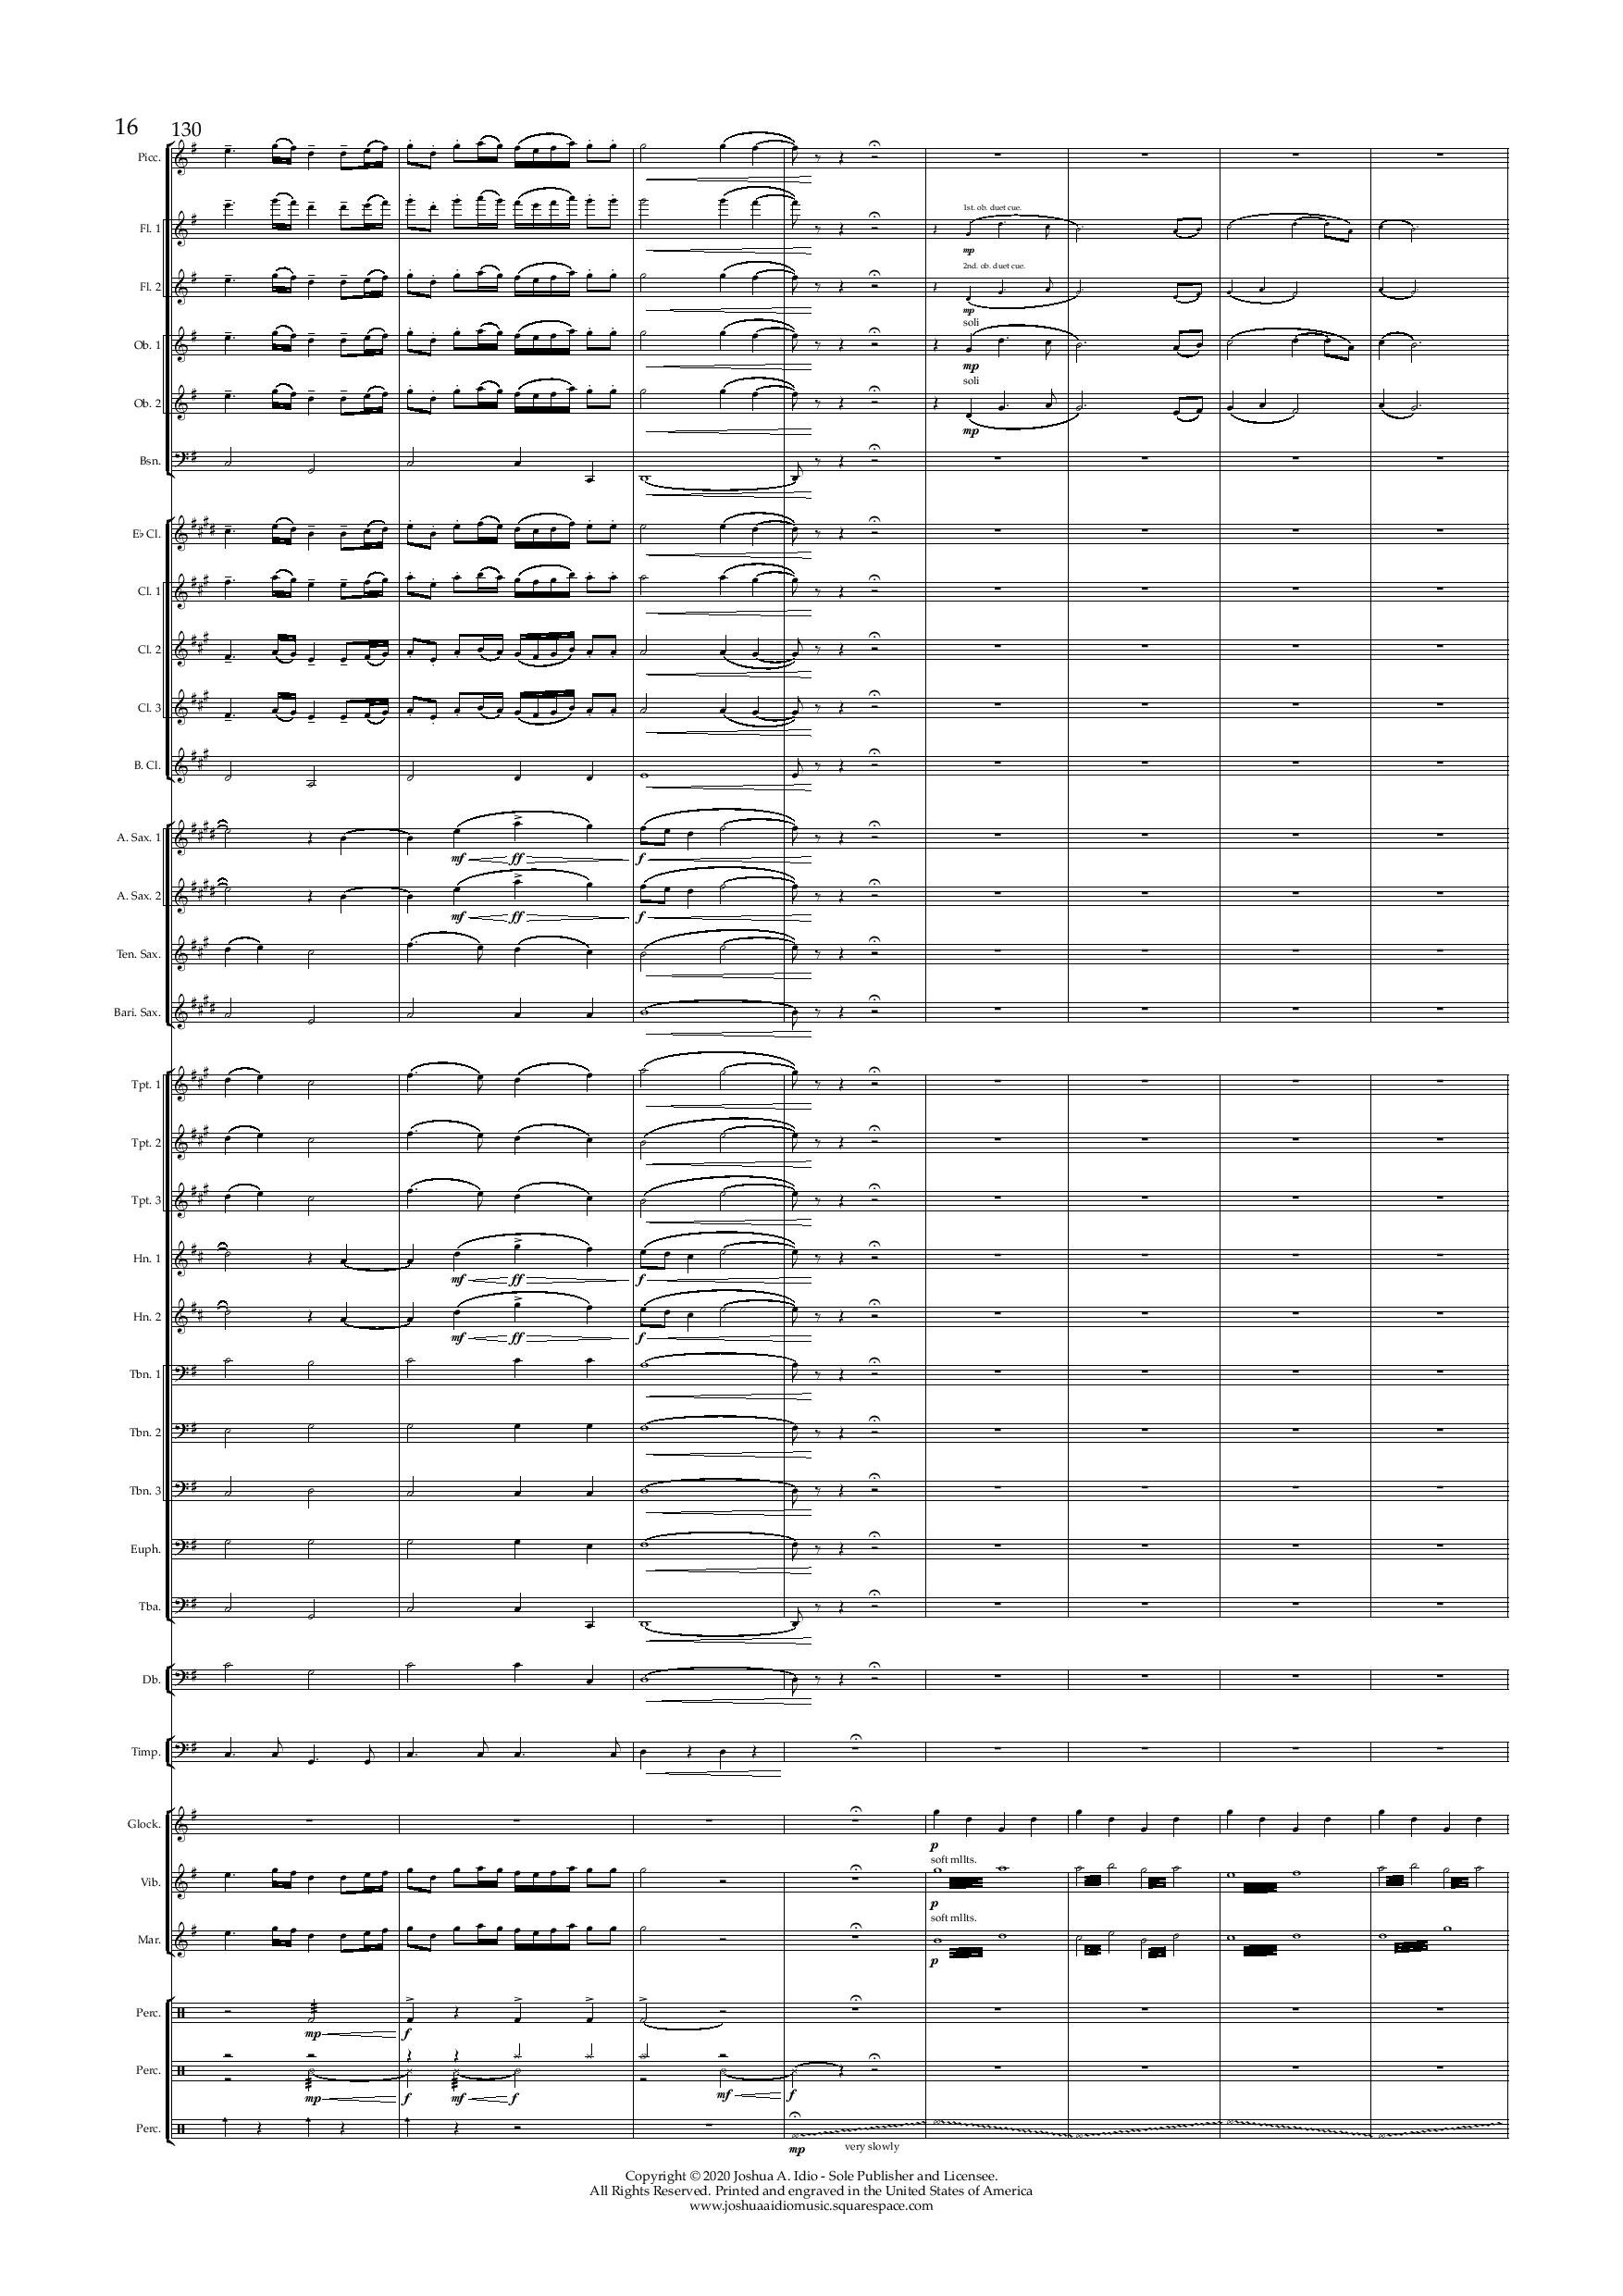 The Cruise Line Dream - Conductor s Score-page-016.jpg